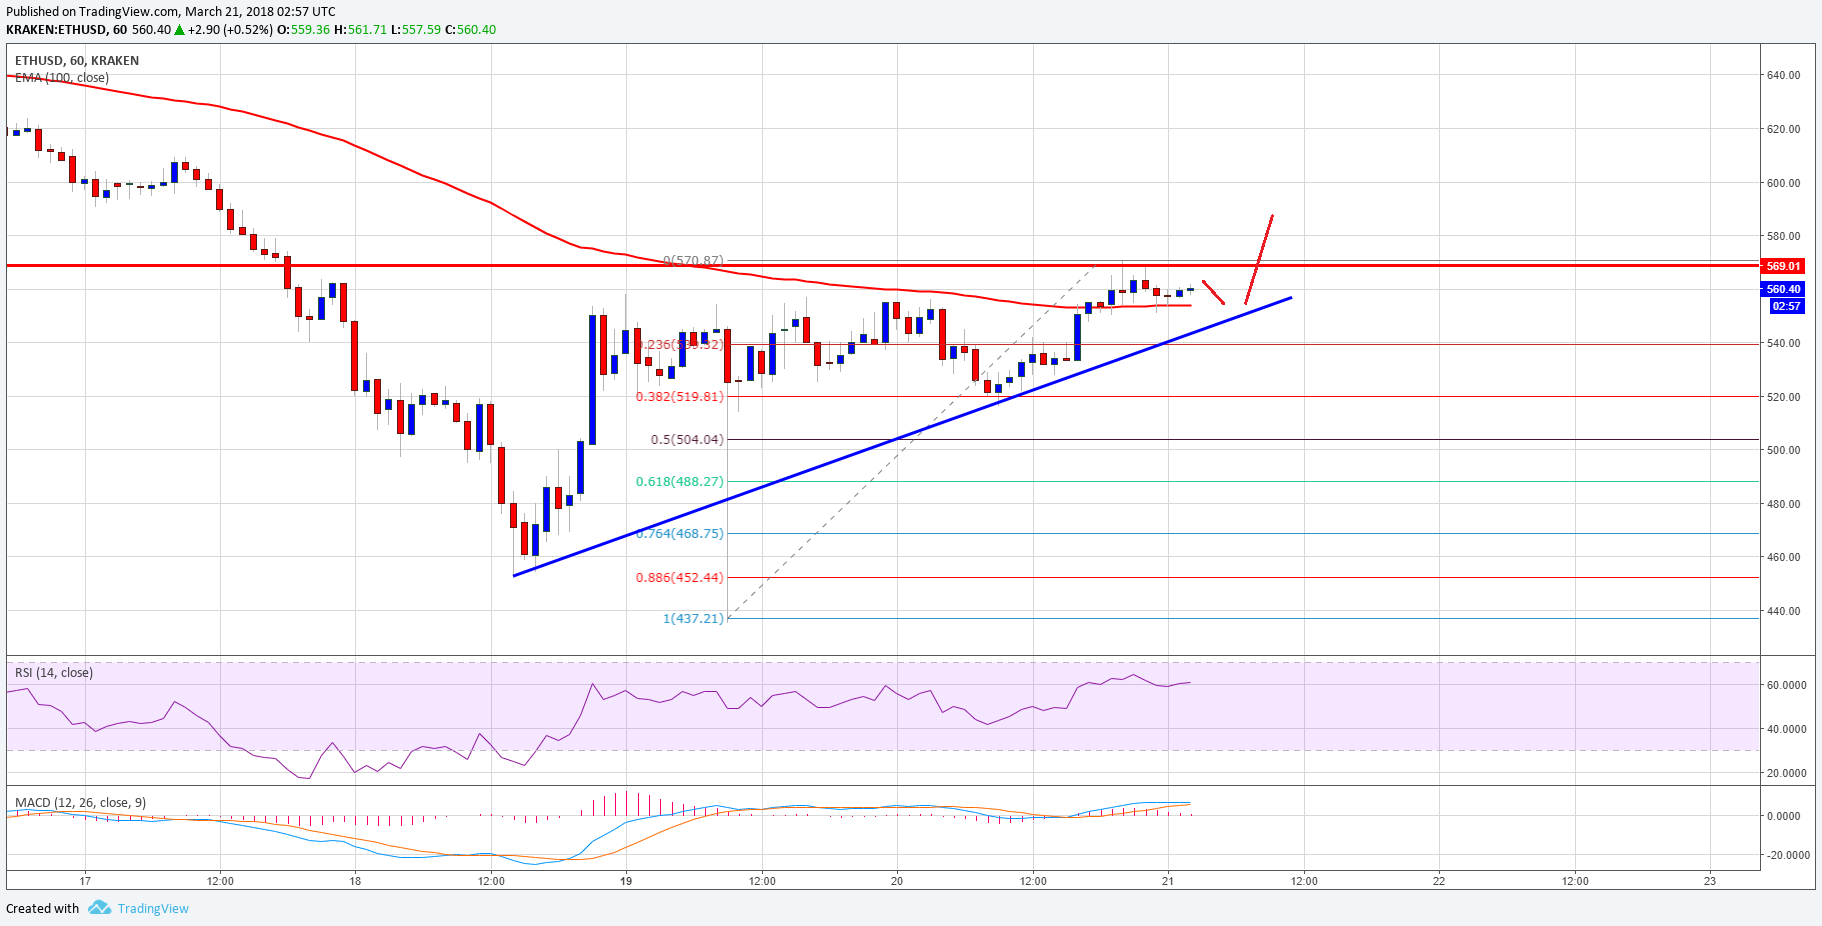 Ethereum Price Technical Analysis – ETH/USD Could Break Higher